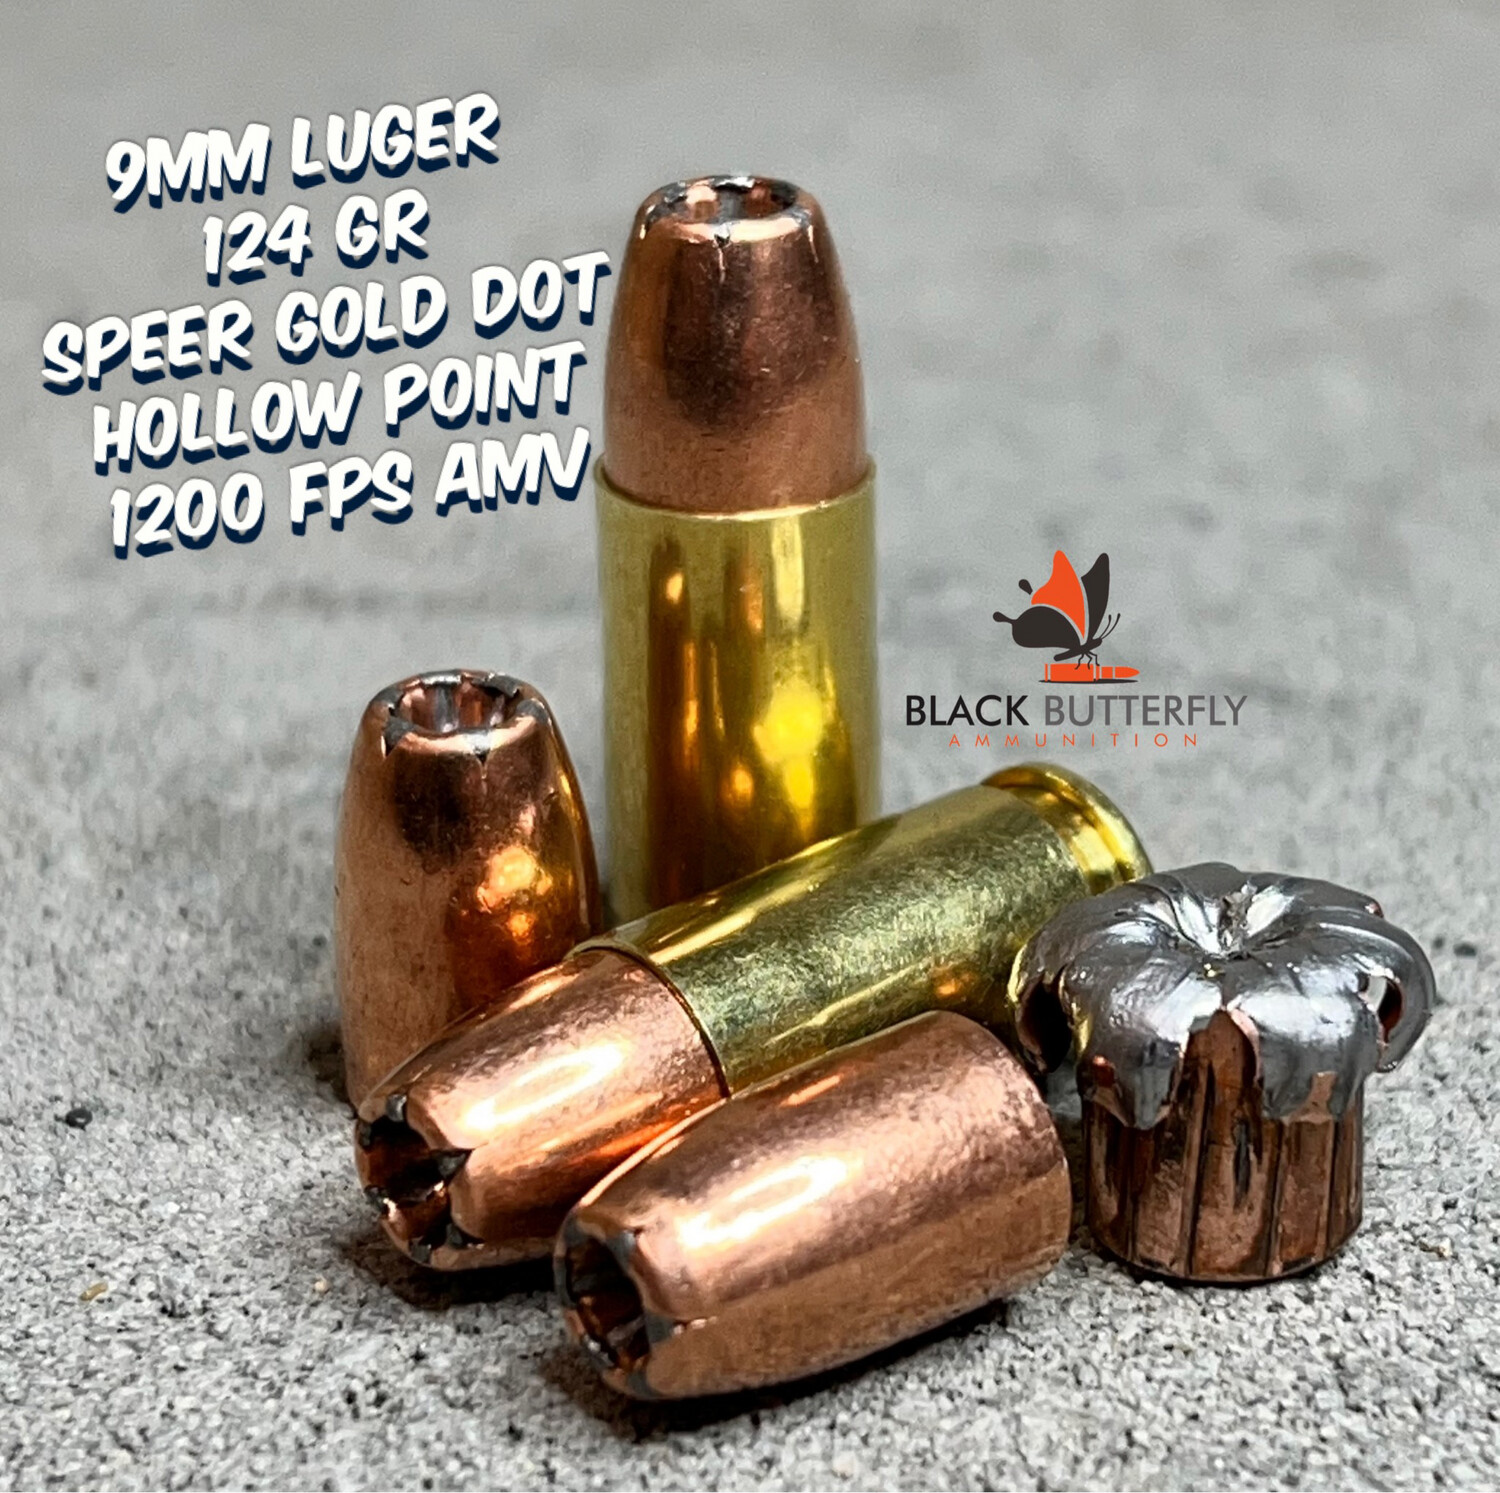 Black Butterfly Ammunition, Premium Self Defense and Hunting Ammo, 9mm Luger, 124 gr, 50 Rounds, Speer Gold Dot (1200 FPS AMV),